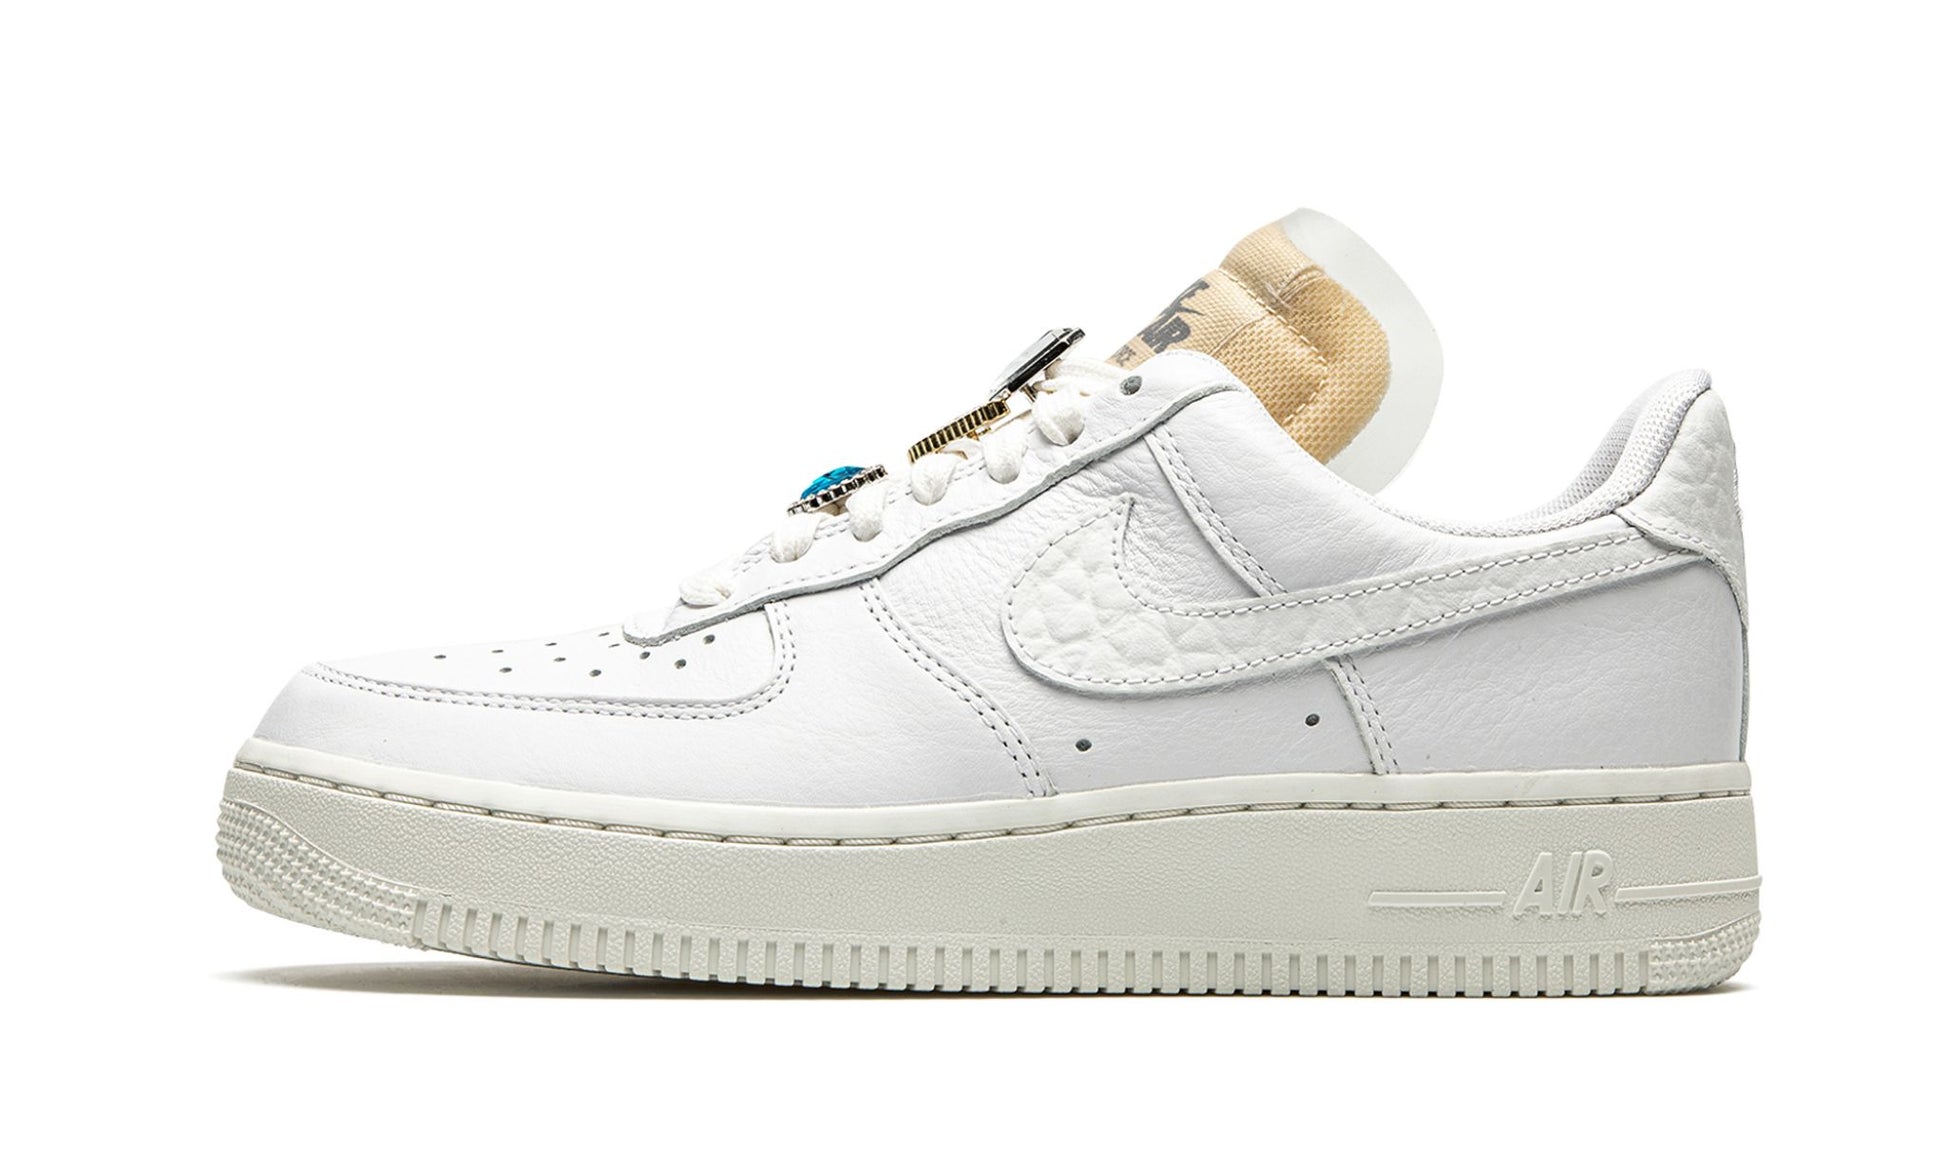 WMNS Air Force 1 Low LX "Bling"